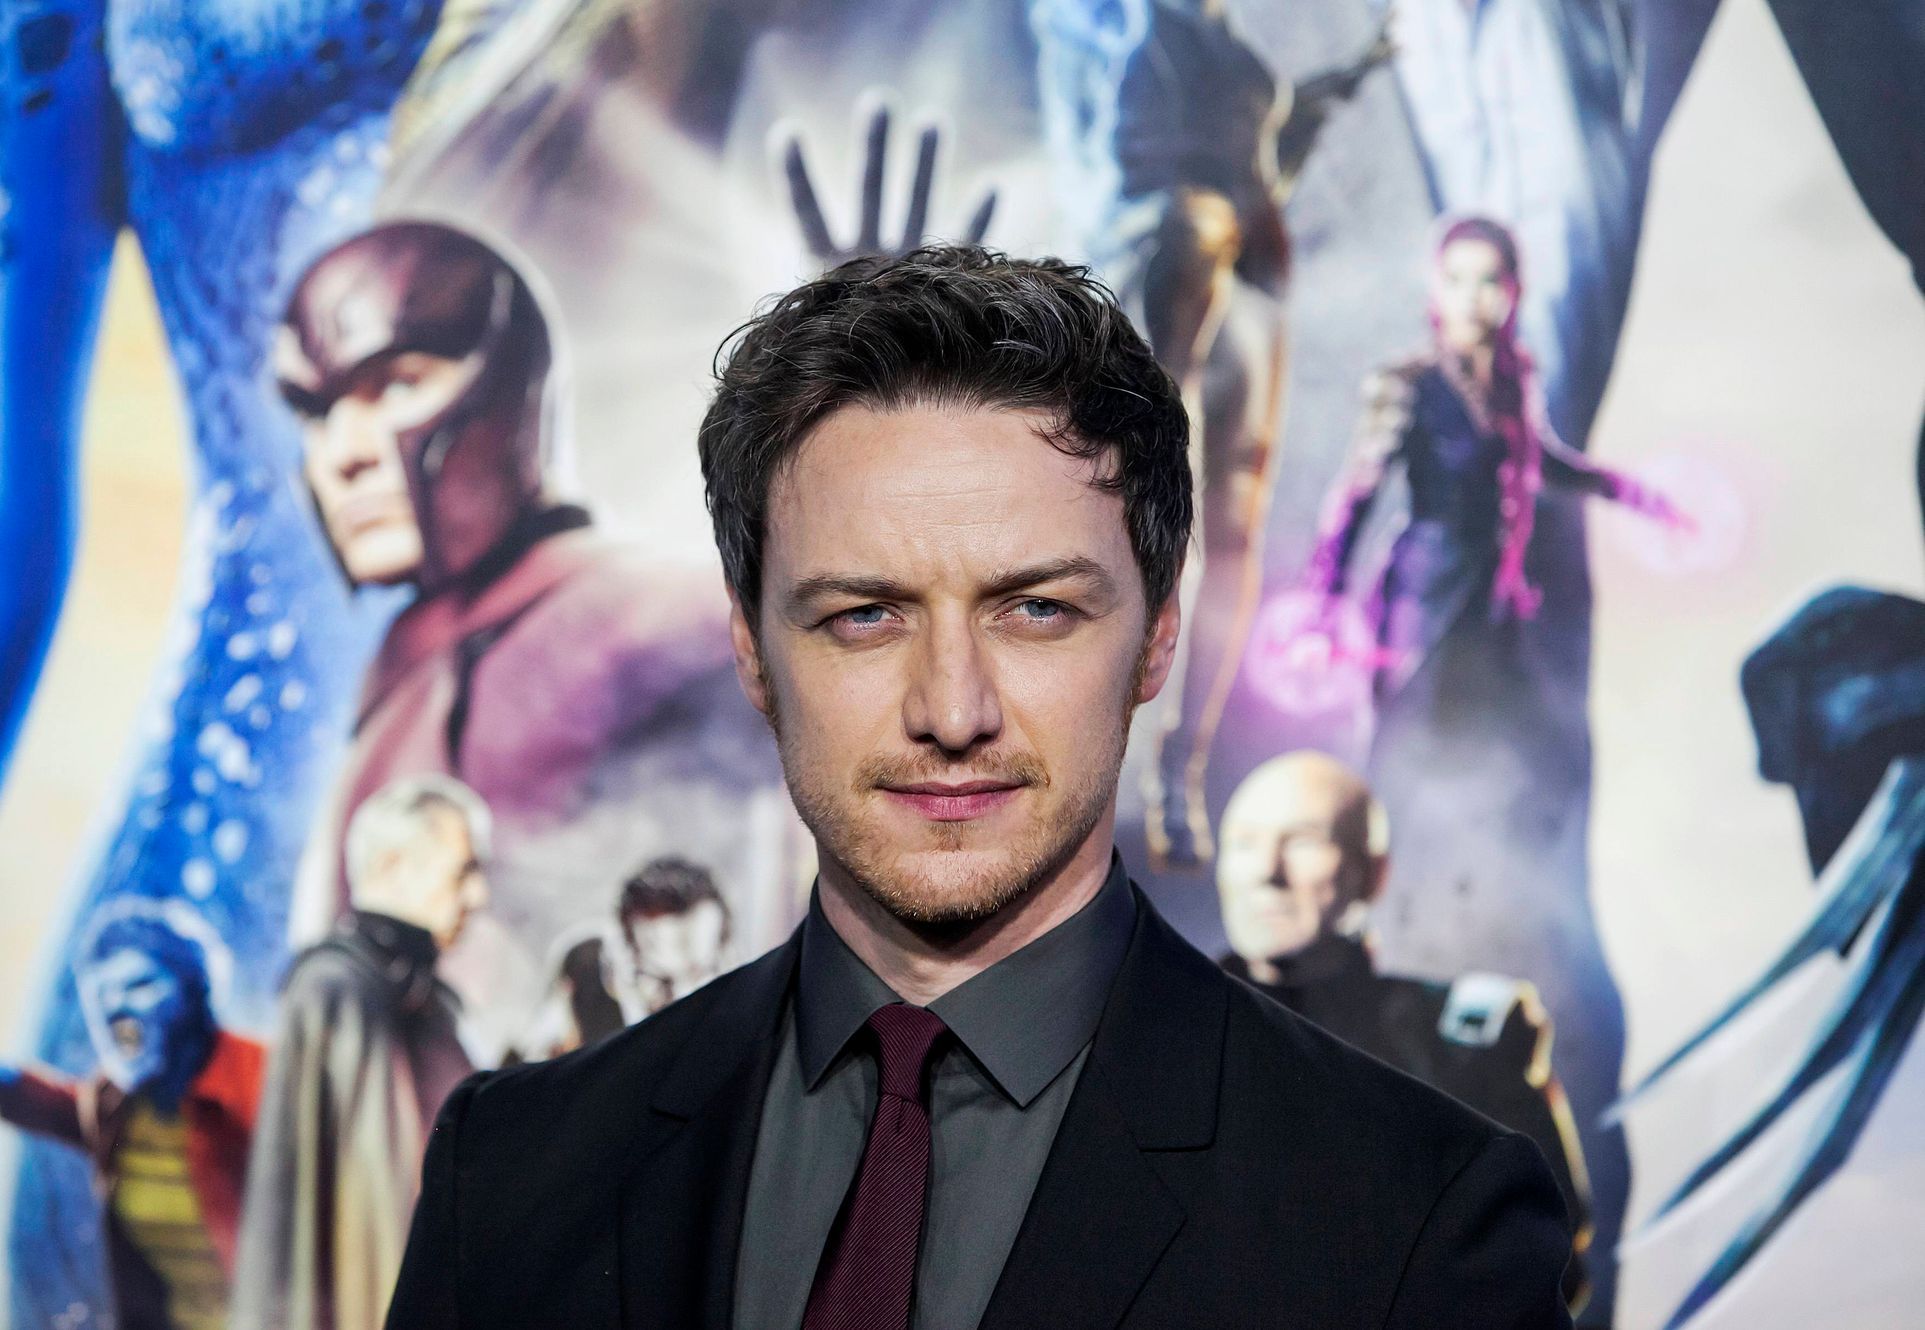 Actor James McAvoy attends the &quot;X-Men: Days of Future Past&quot; world movie premiere in New York